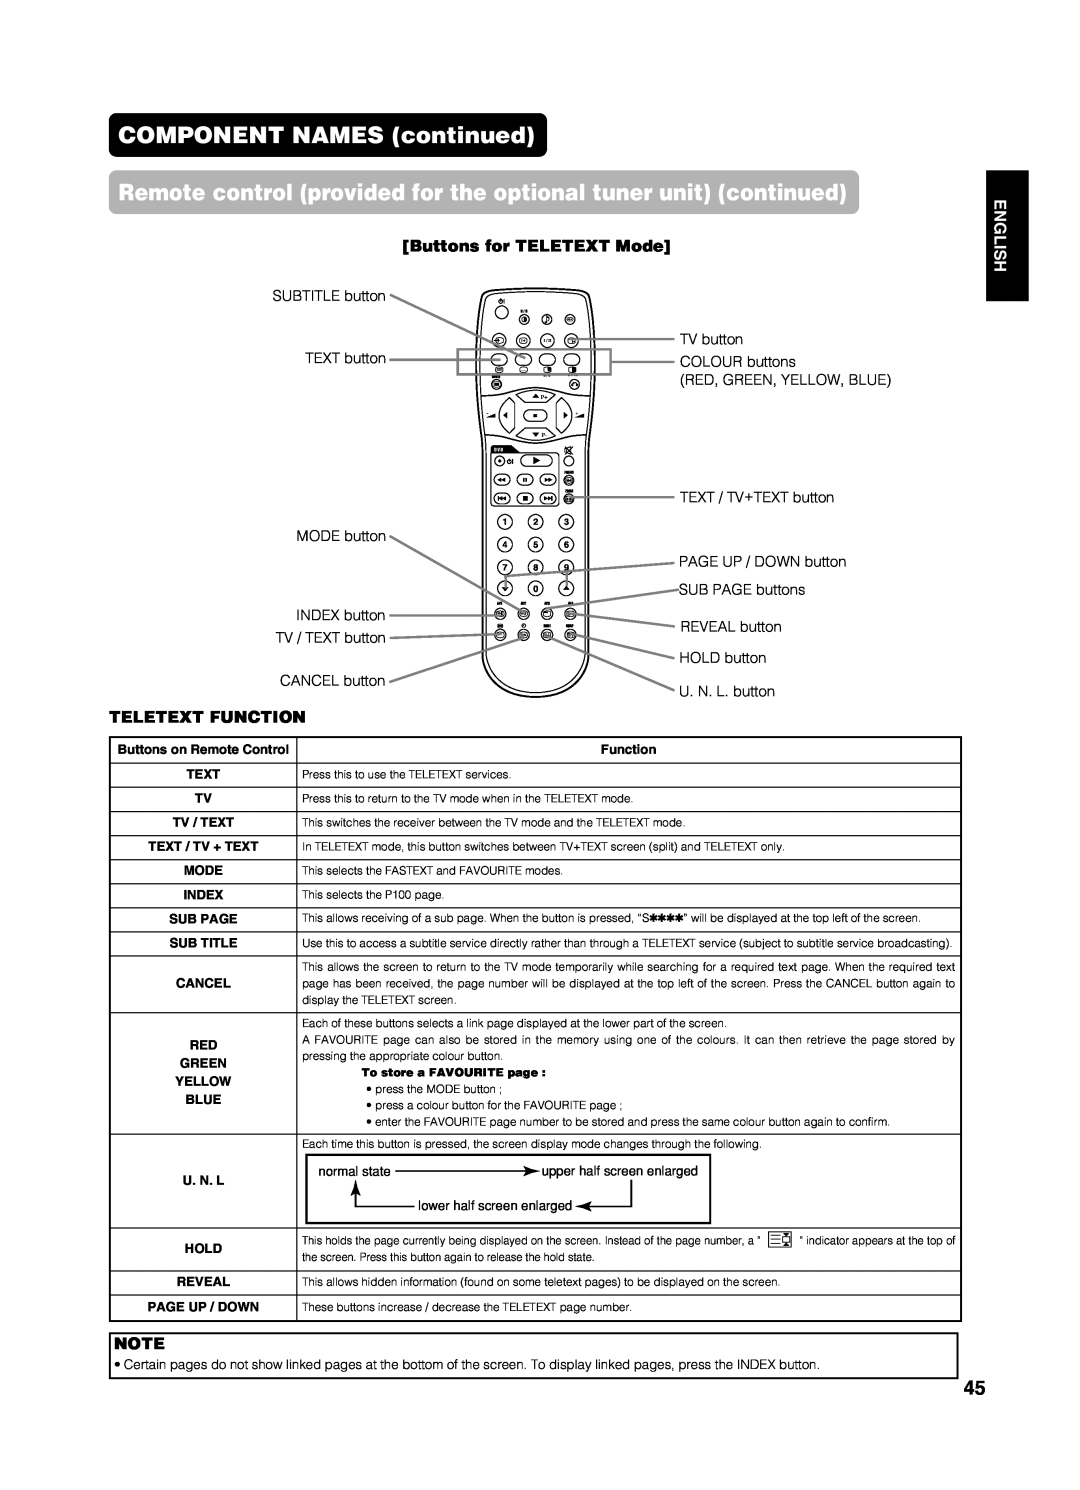 Yamaha PDM-4210E COMPONENT NAMES continued, Remote control provided for the optional tuner unit continued, English 